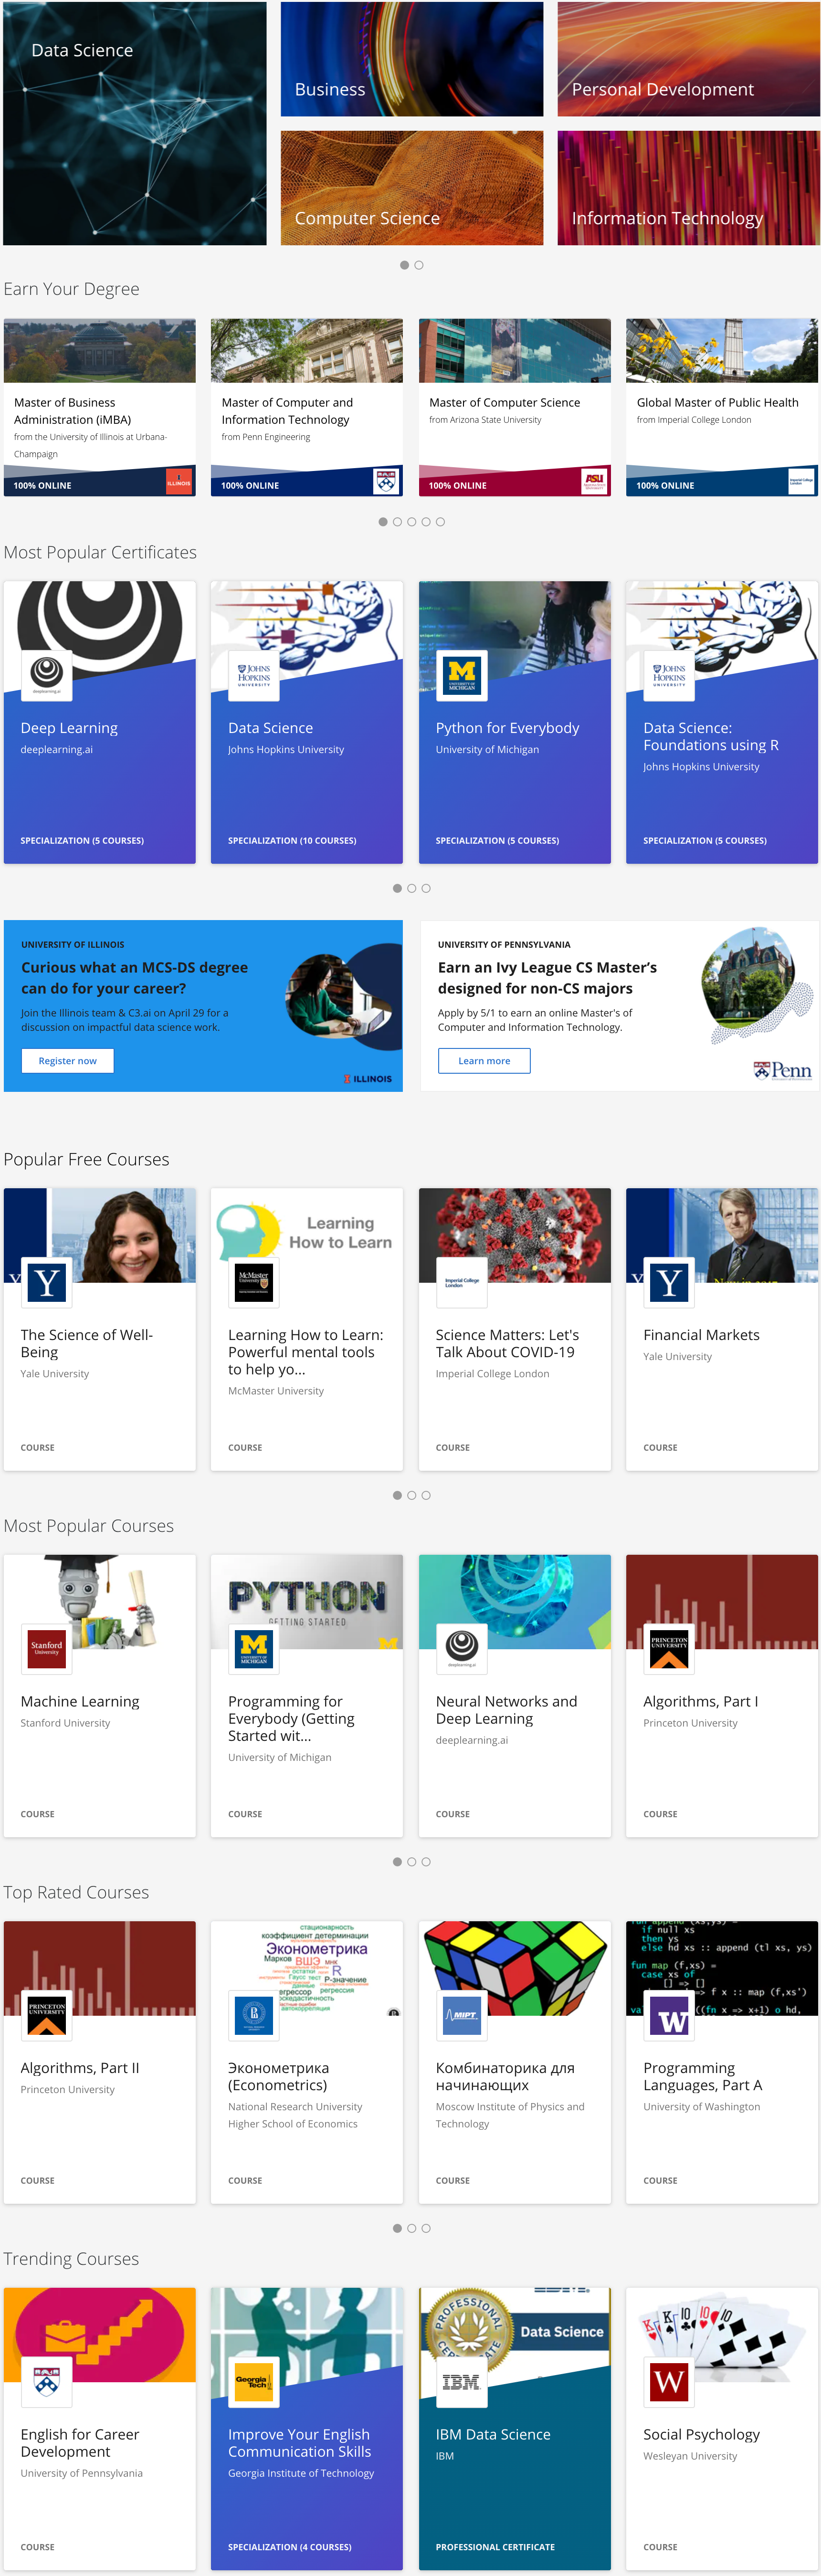 Coursera- Courses Offered By Them